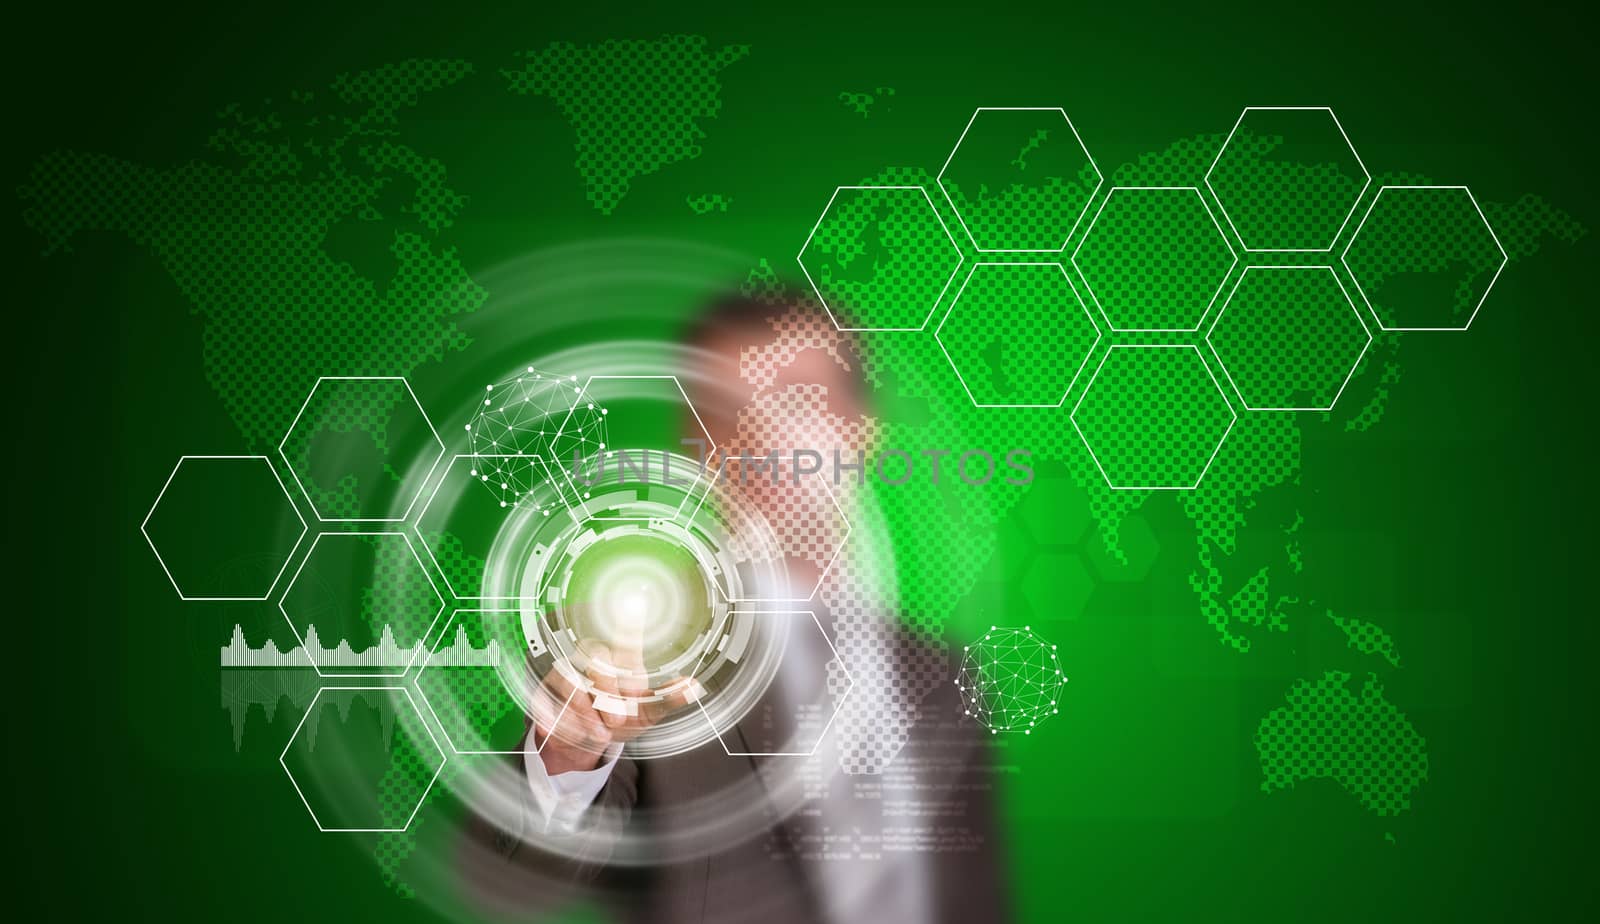 Businessman in suit finger presses virtual button. Glow circles, hexagons and world map